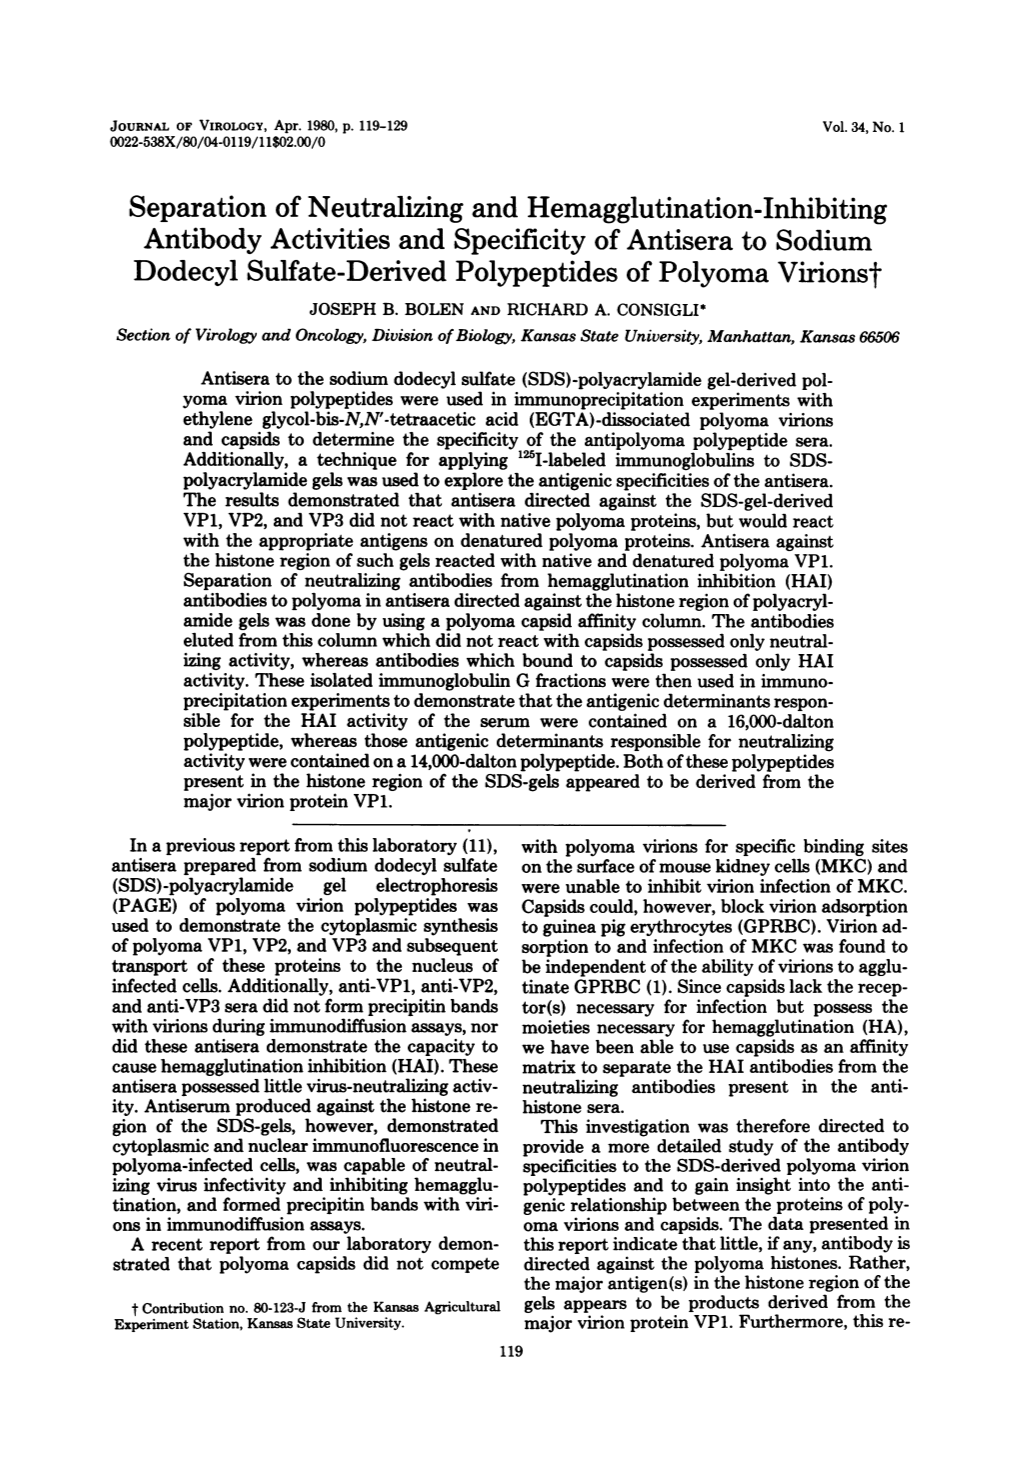 Dodecyl Sulfate-Derived Polypeptides of Polyoma Virionst JOSEPH B